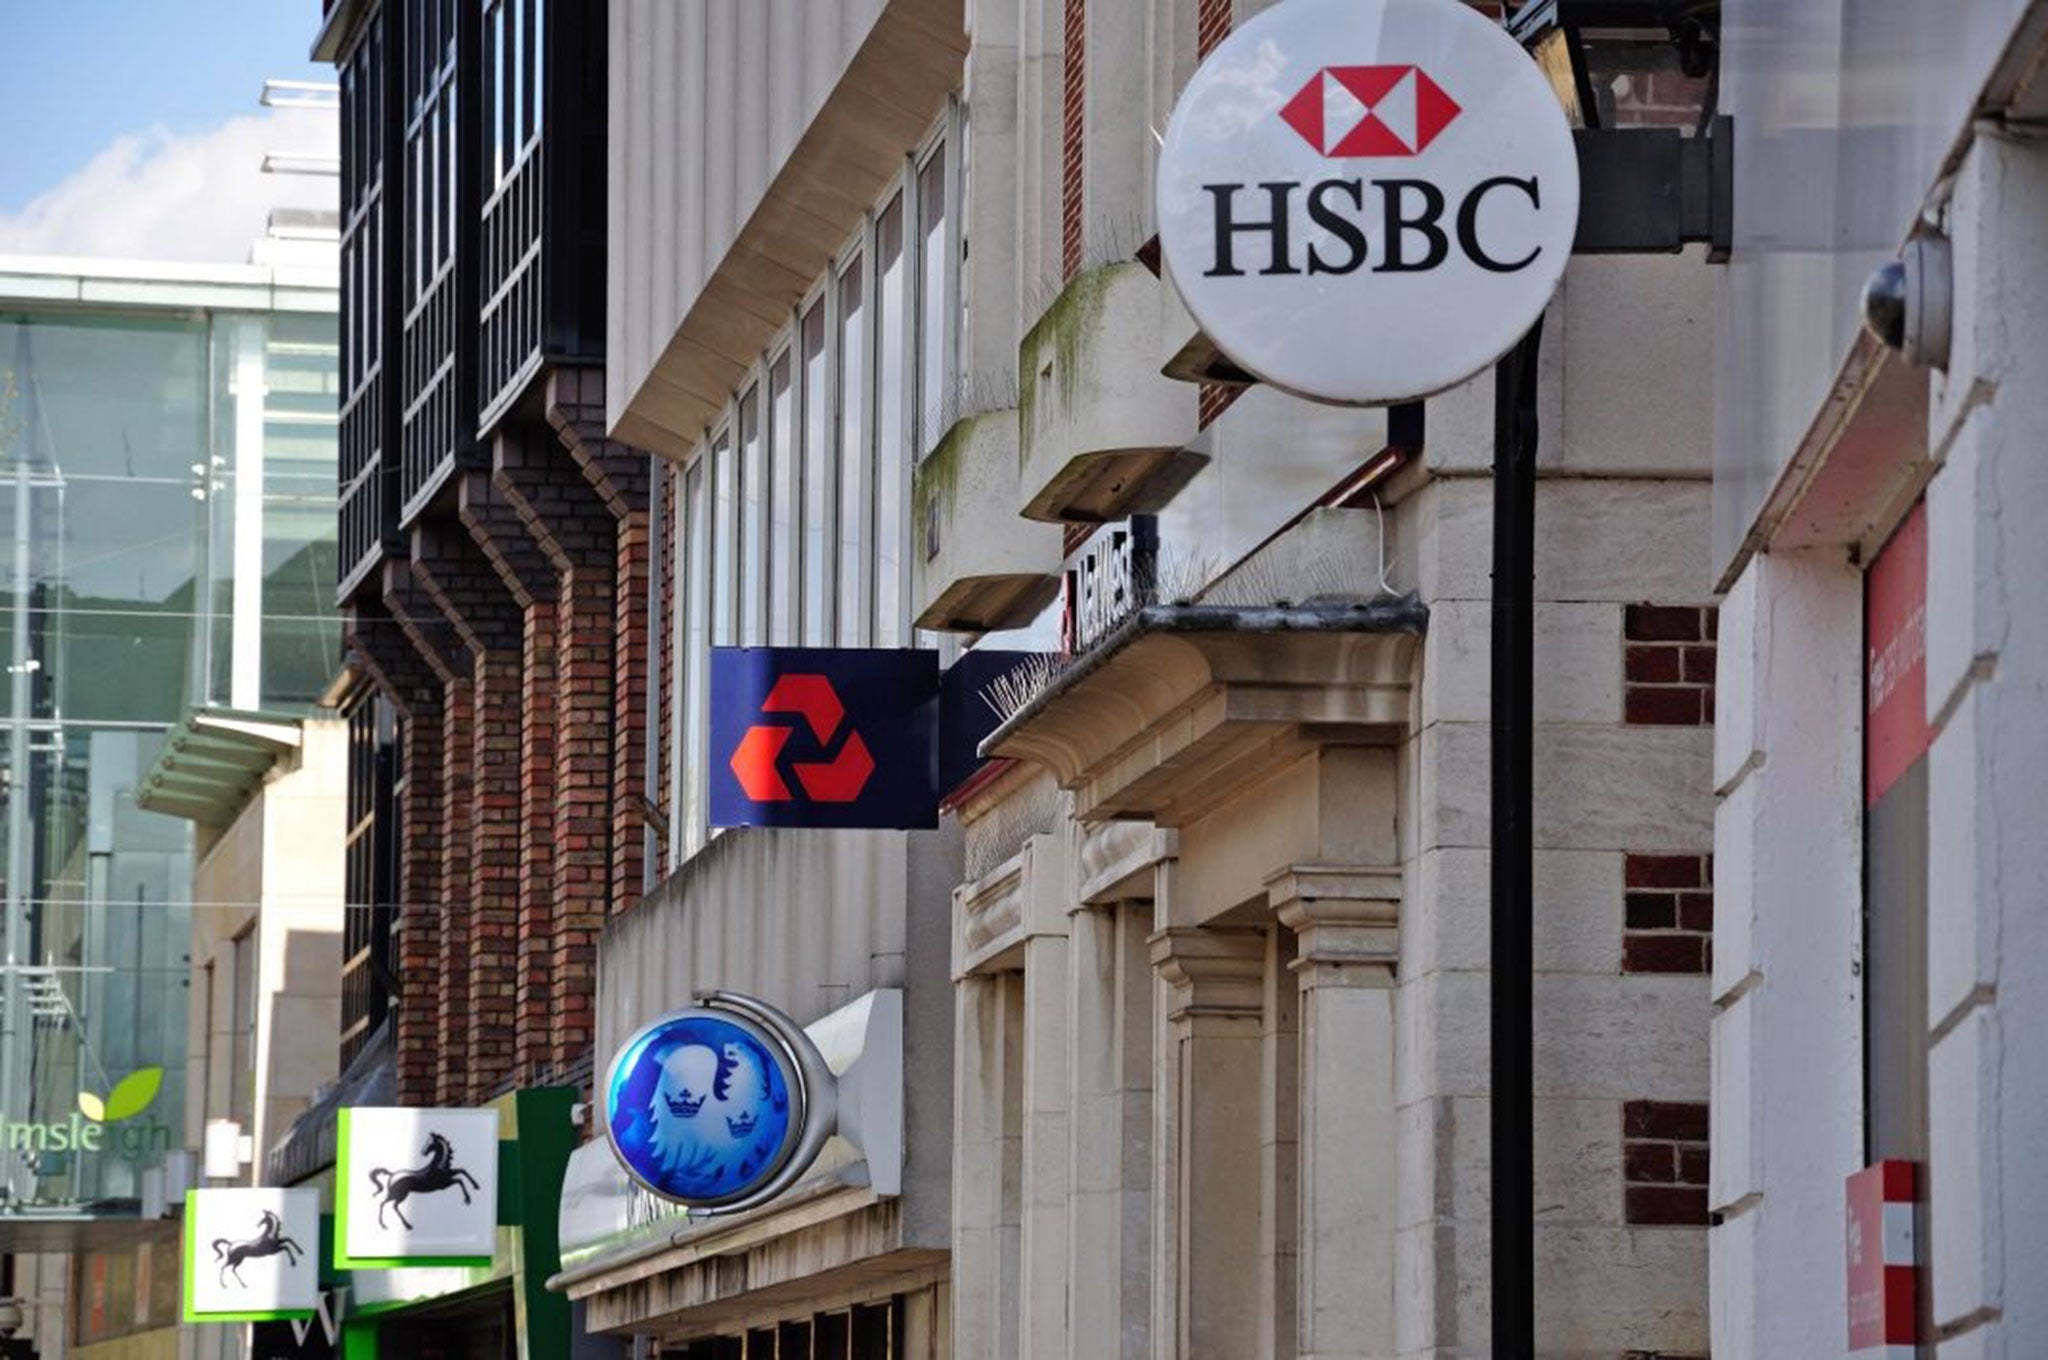 High costs on the high street: the largest players in British banking may not have enough incentive to be competitive